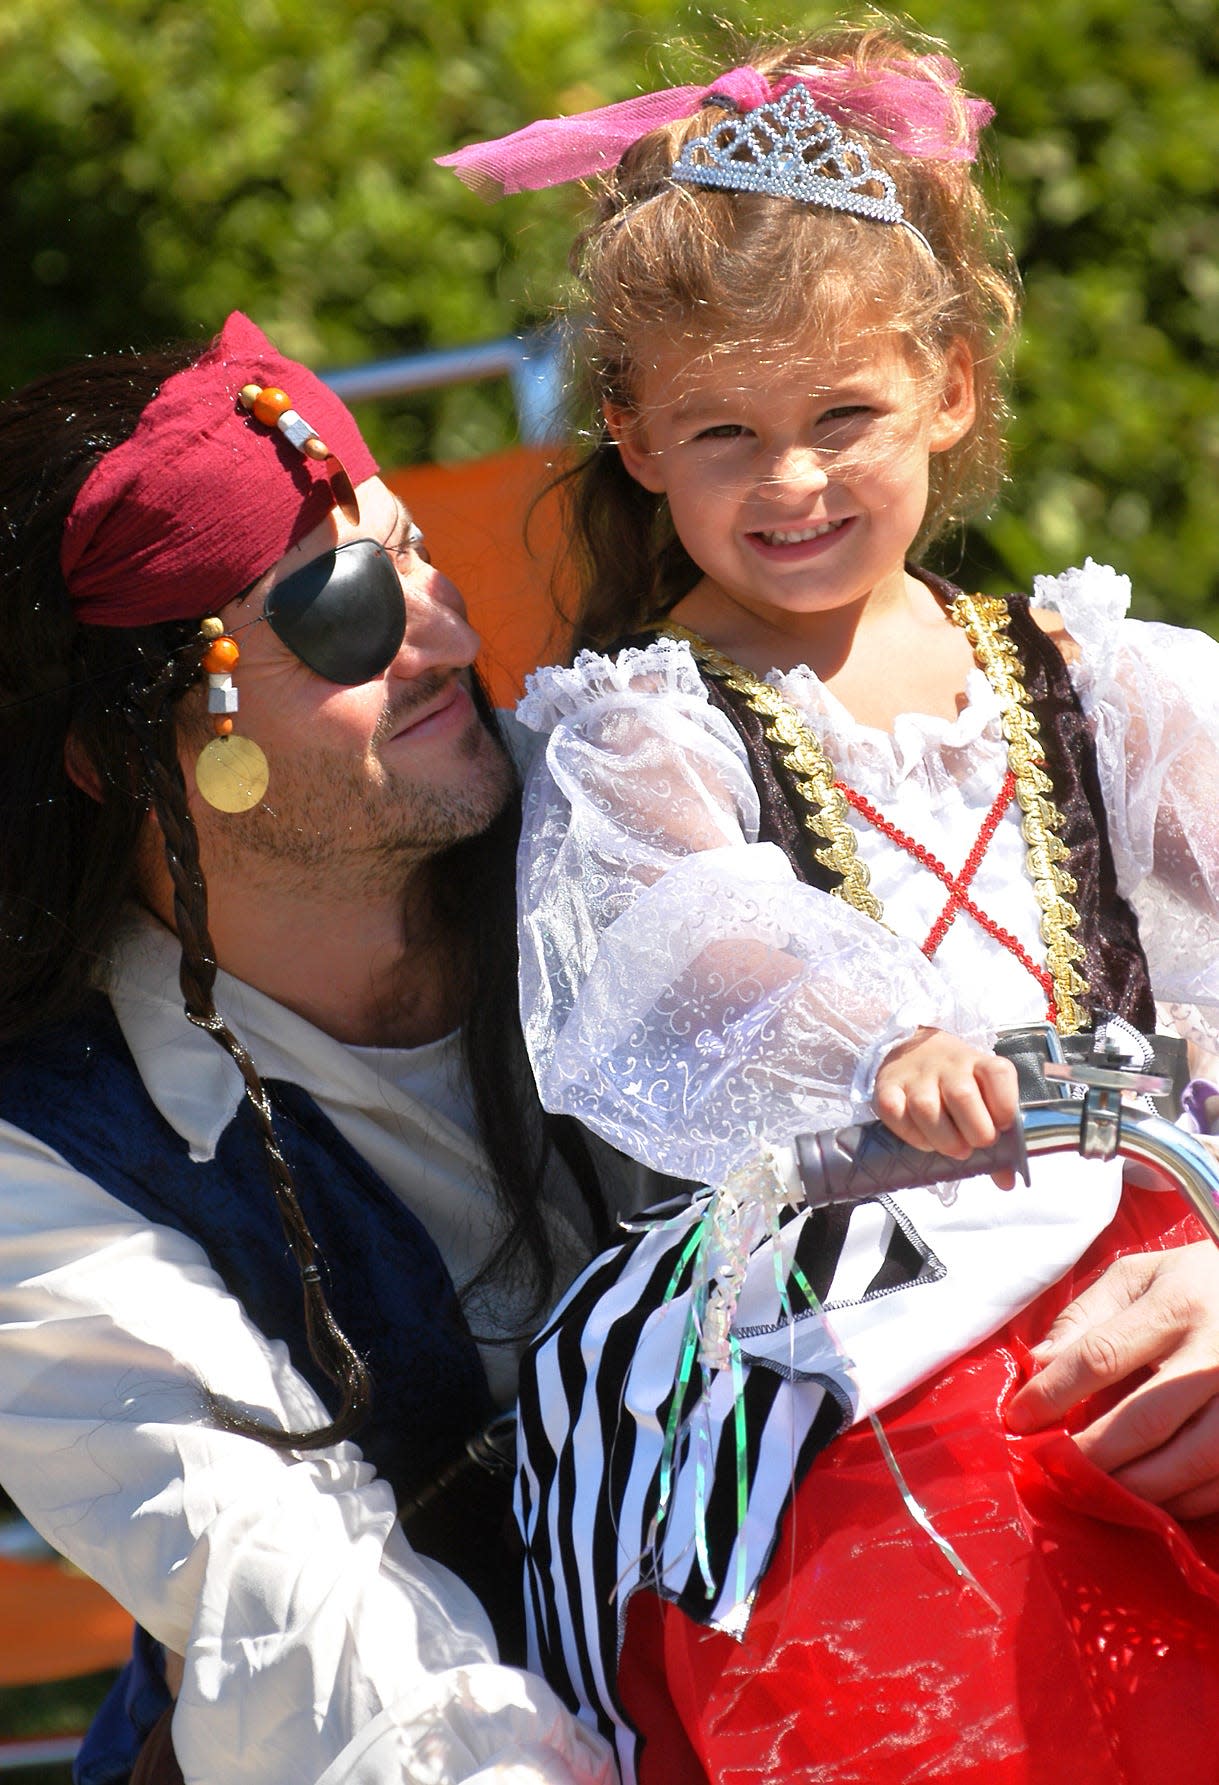 Stephen Nepa and his 4-year-old daughter Arabella Nepa dressed up as pirates and princesses Saturday for the Tybee Pirate Fest Parade.